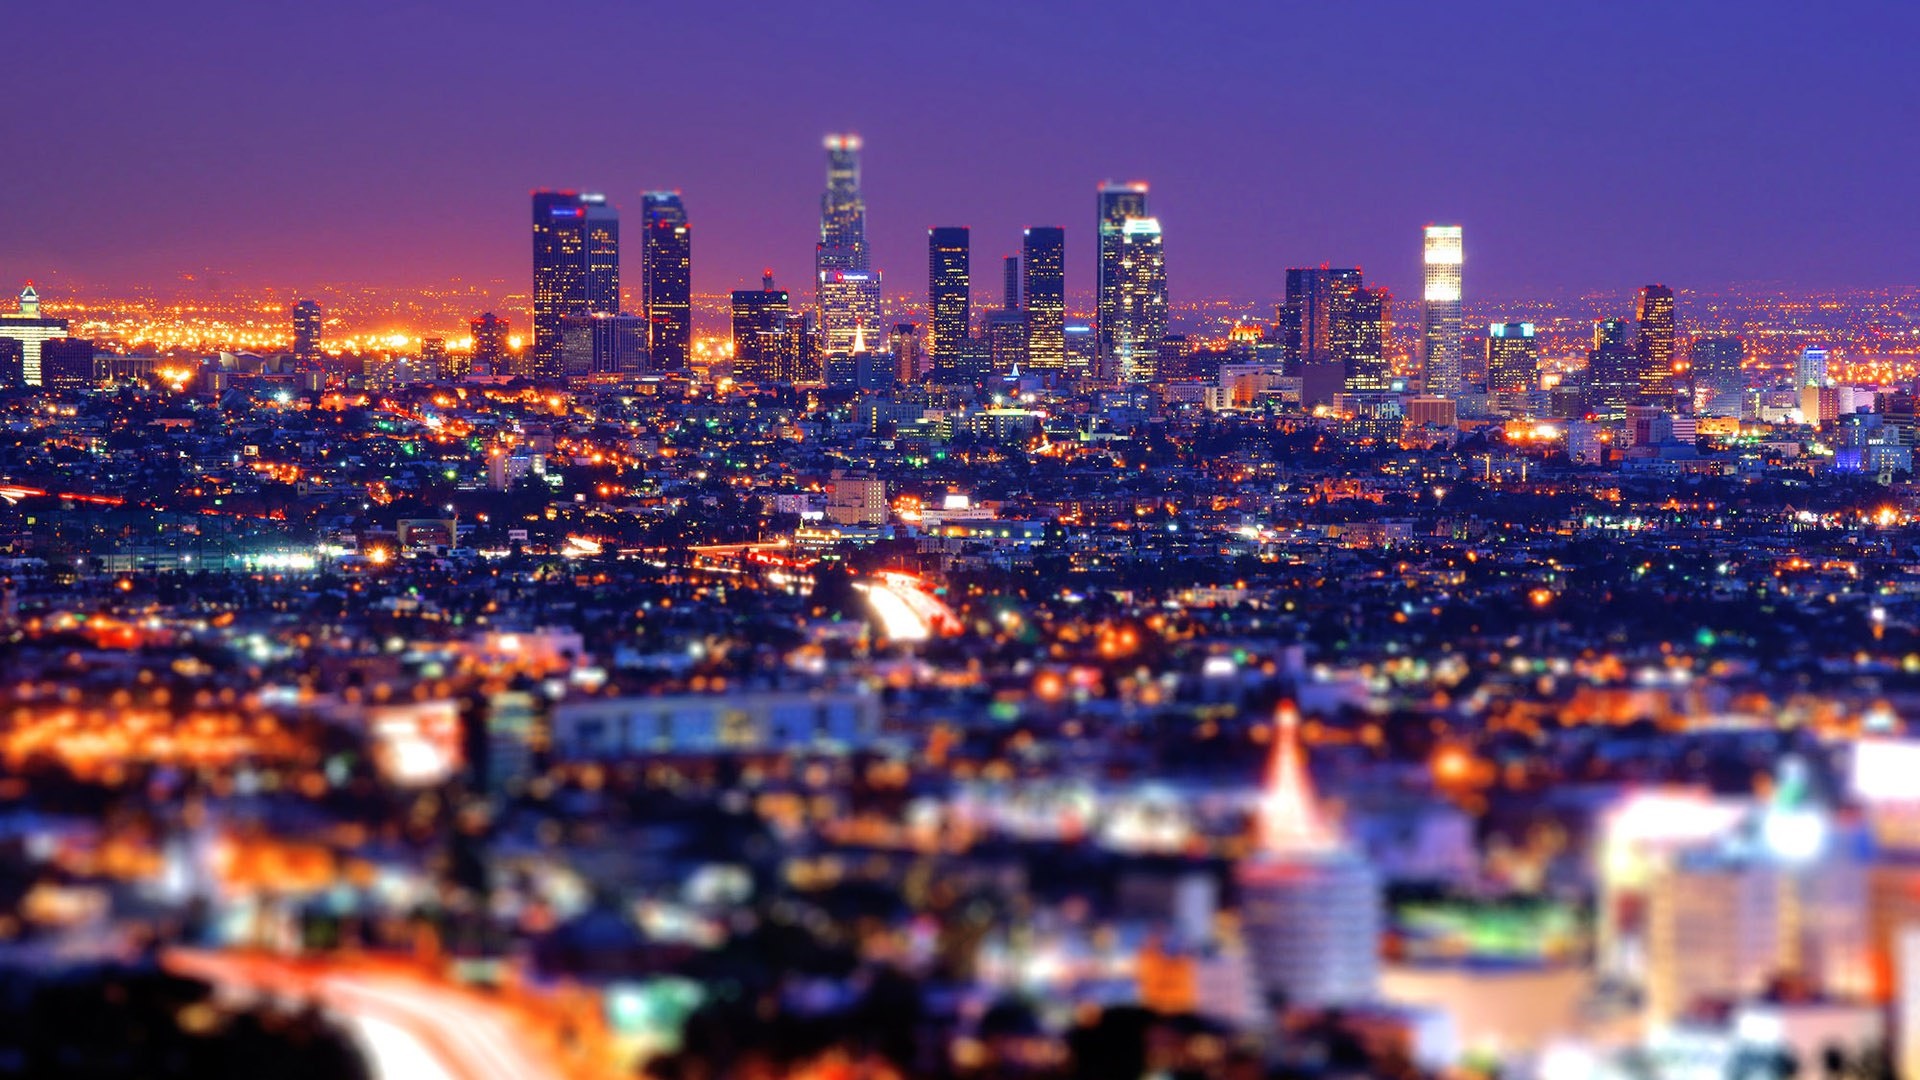 Los Angeles during night time- Tilt-shift photography wallpaper - backiee